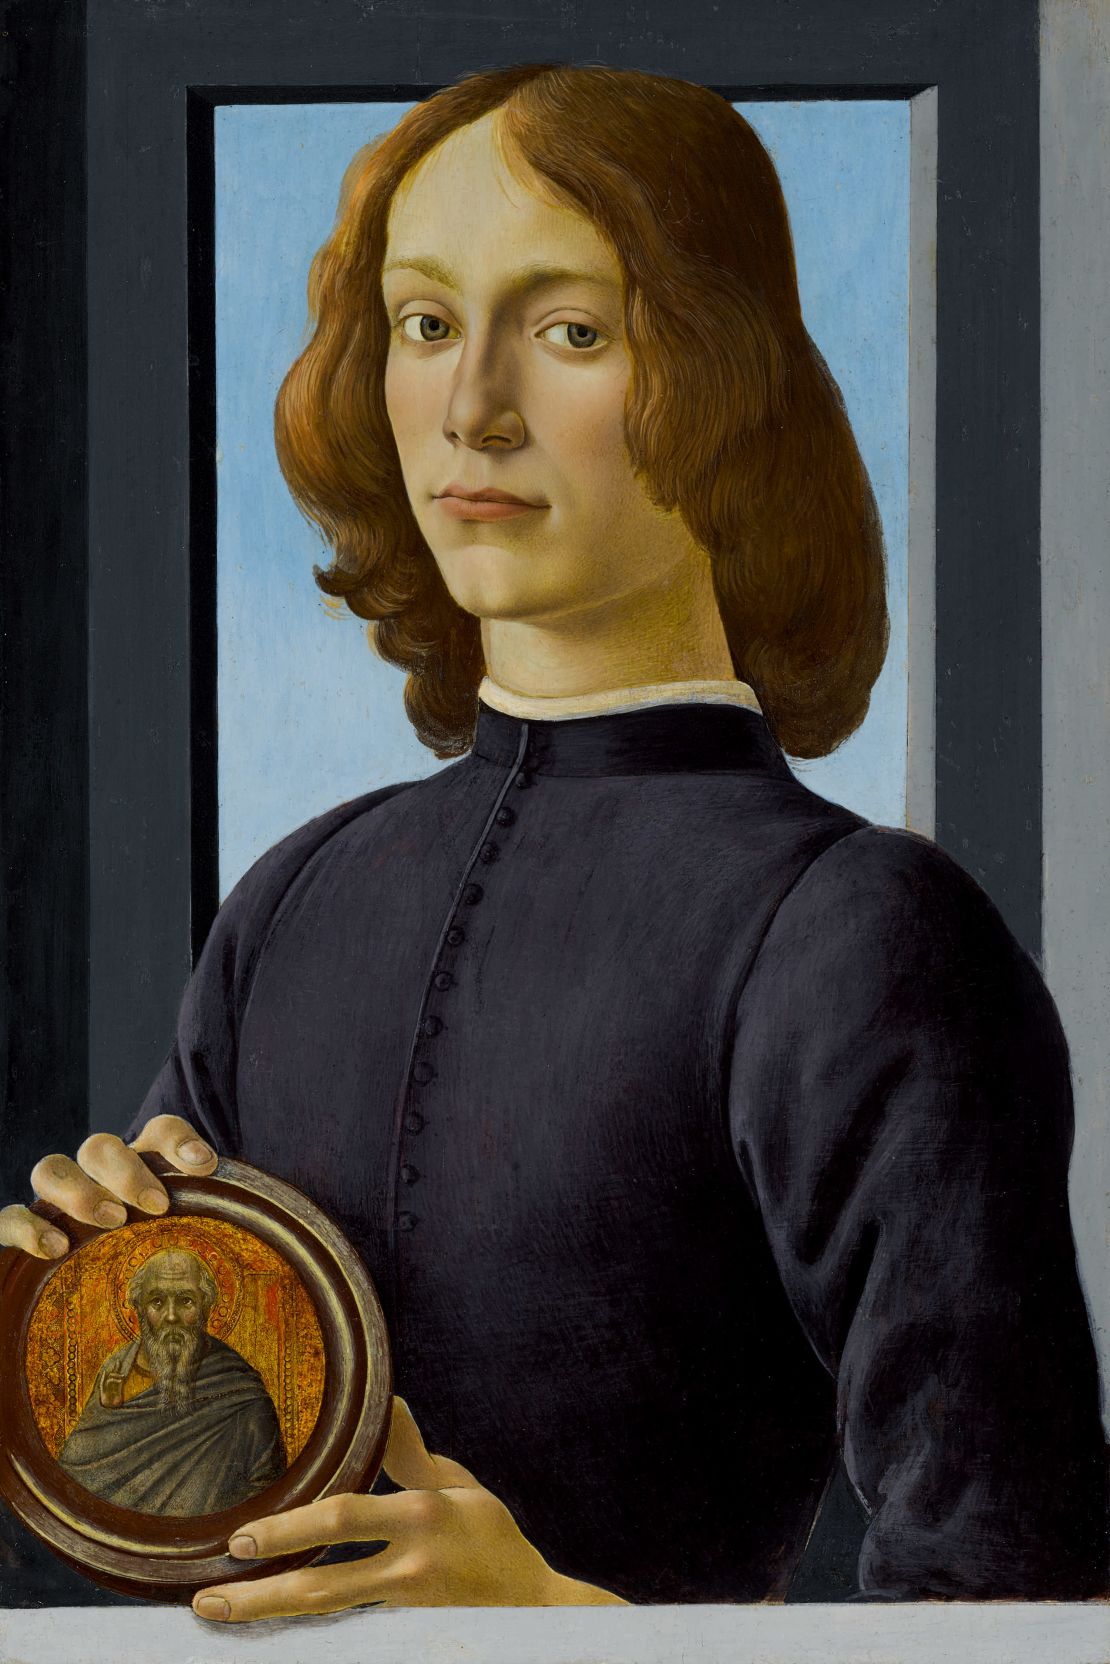 Botticelli incorporated the work of an earlier artist into the roundel held by his unidentified subject.